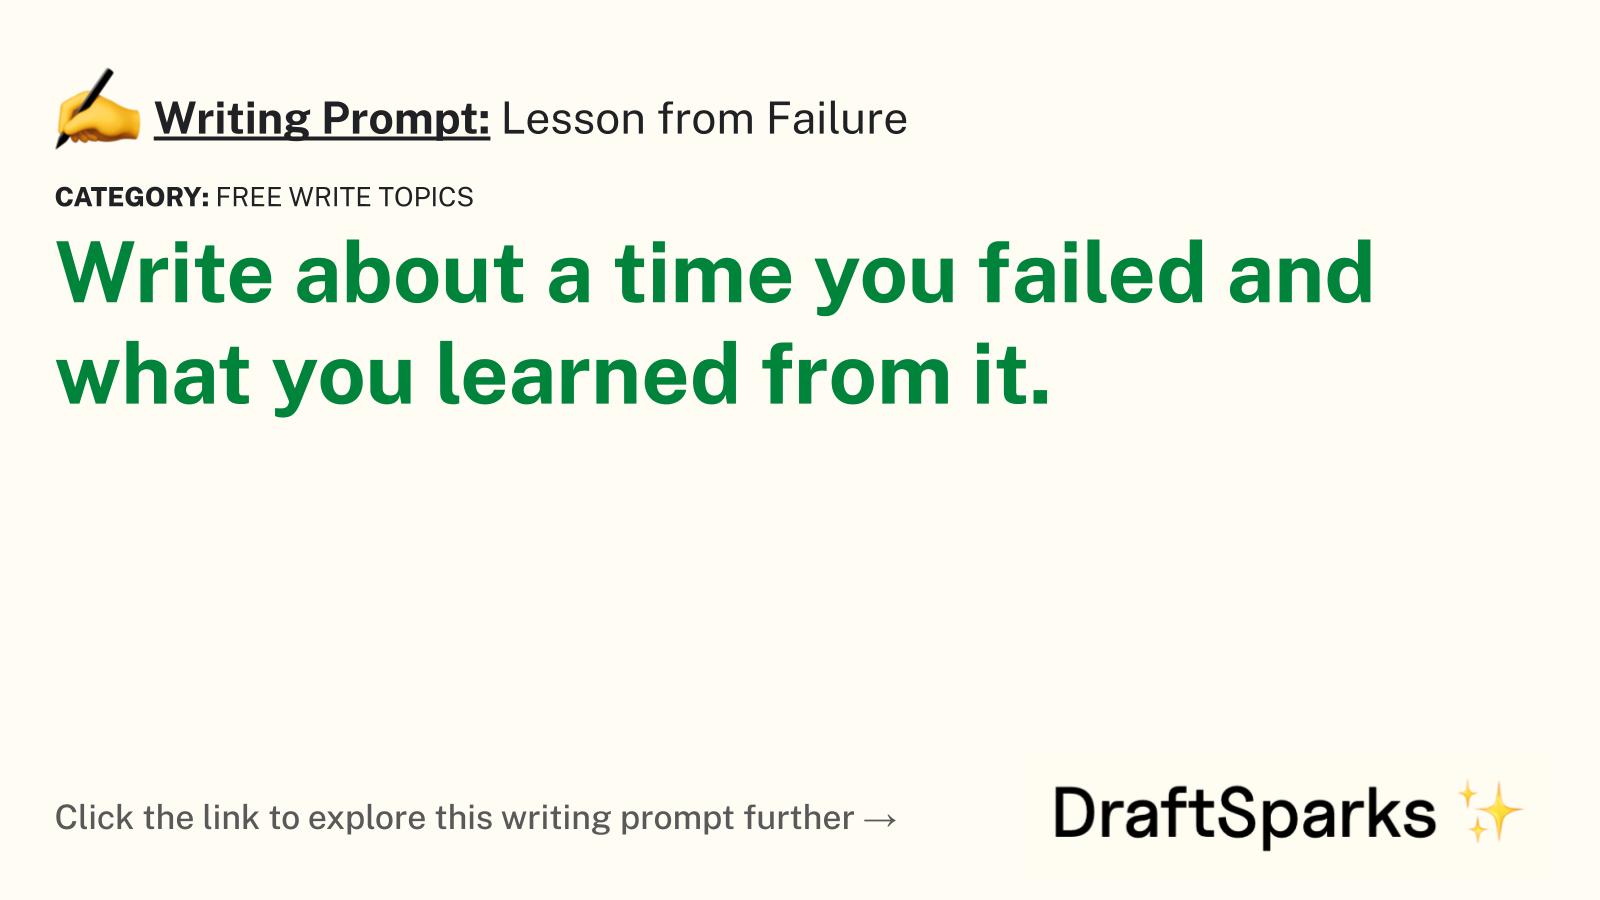 Lesson from Failure